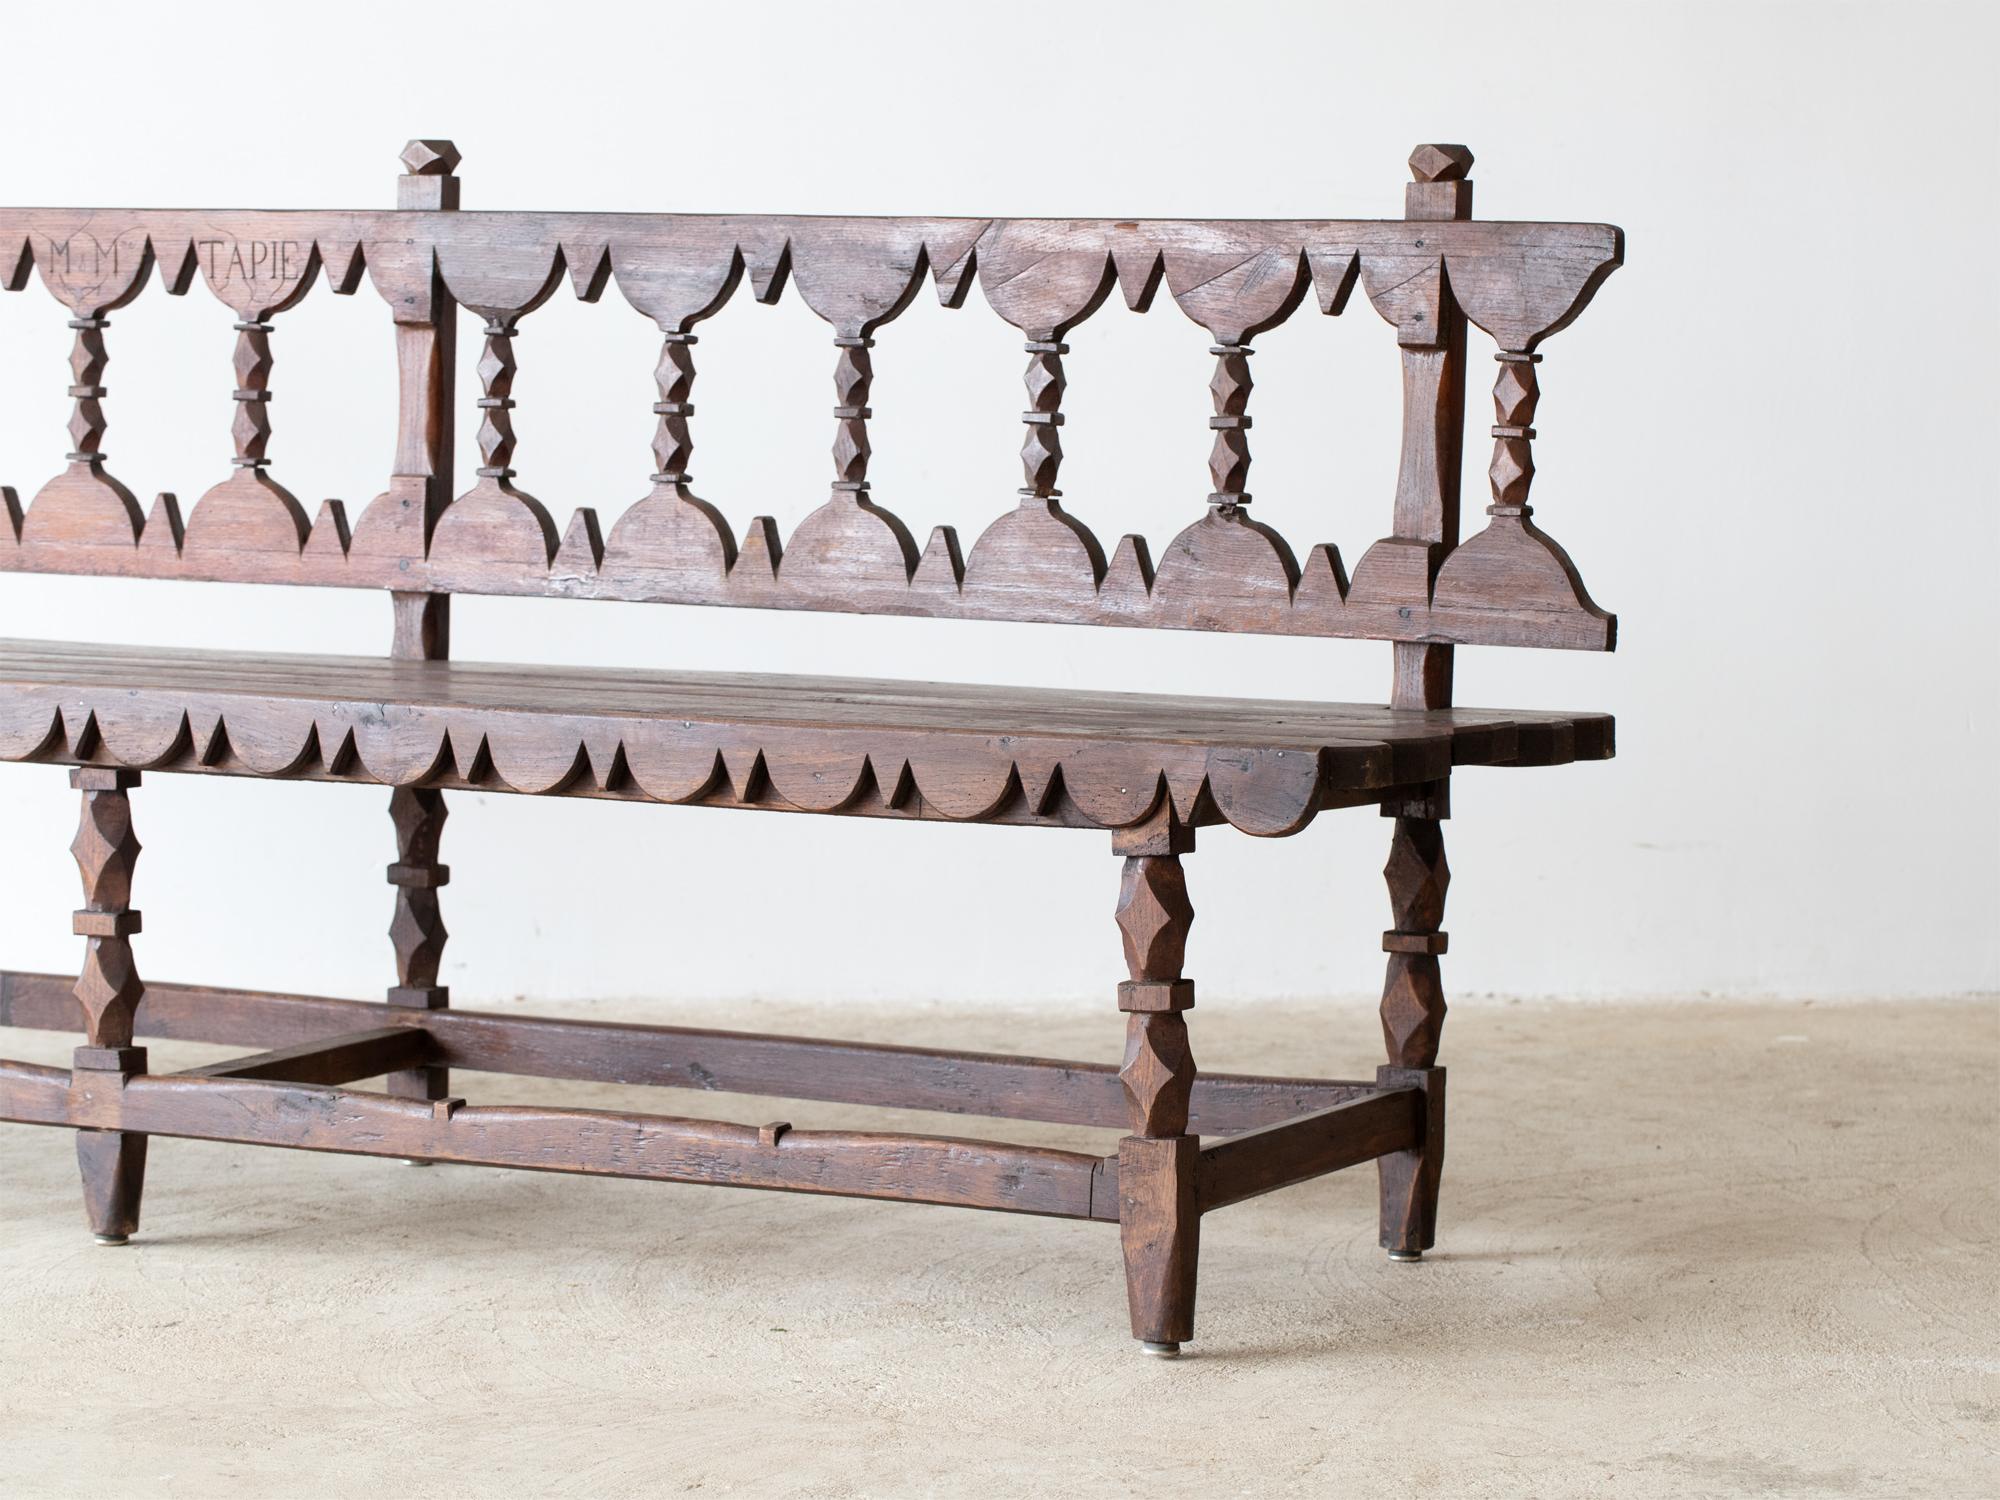 French Provincial Provincial French Oak Marriage Bench, c. 1830s